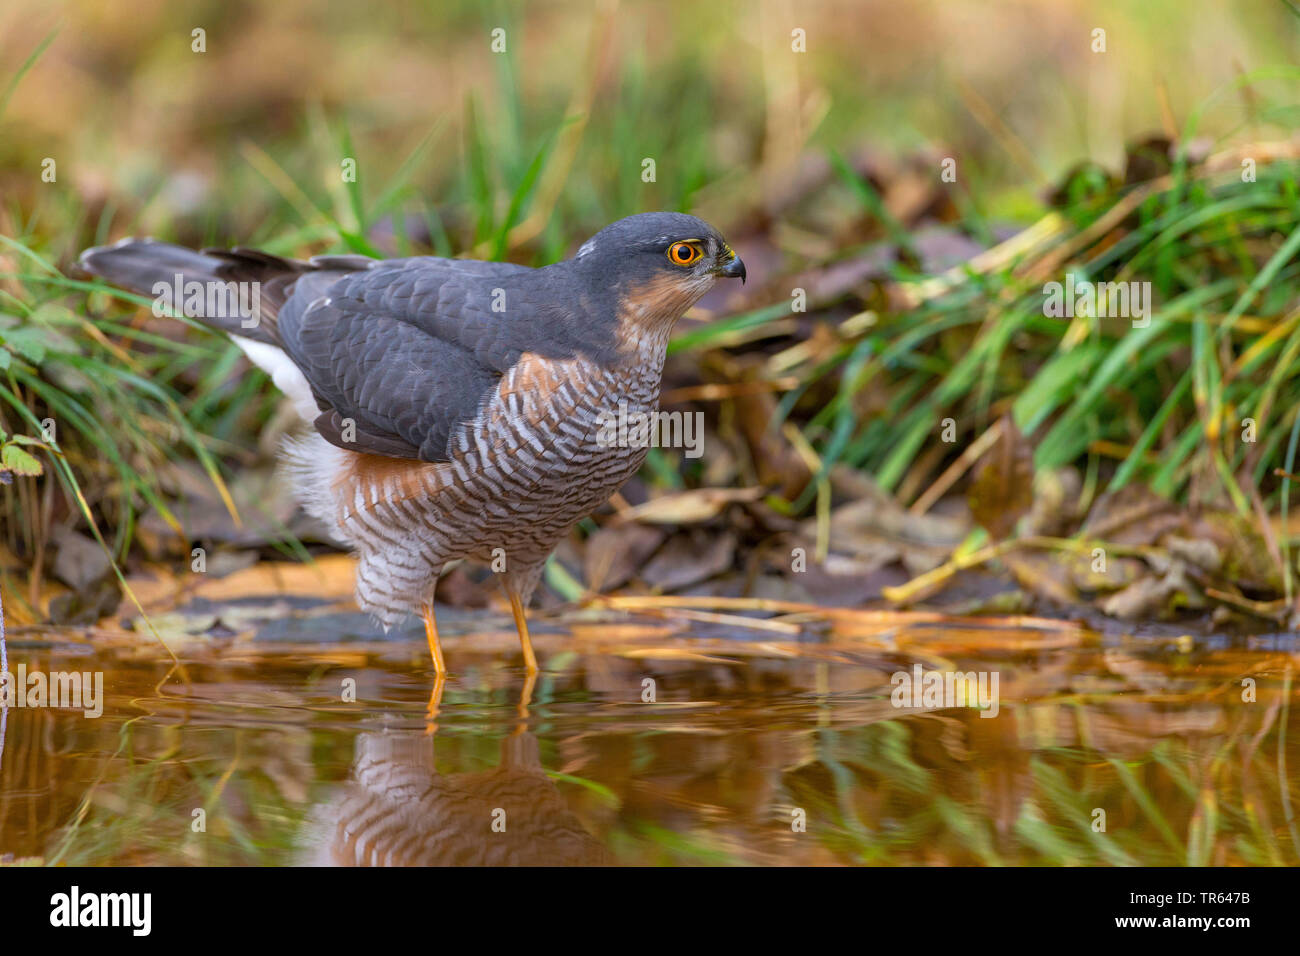 northern sparrow hawk (Accipiter nisus), male standing in shallow water, side , Germany, Bavaria Stock Photo